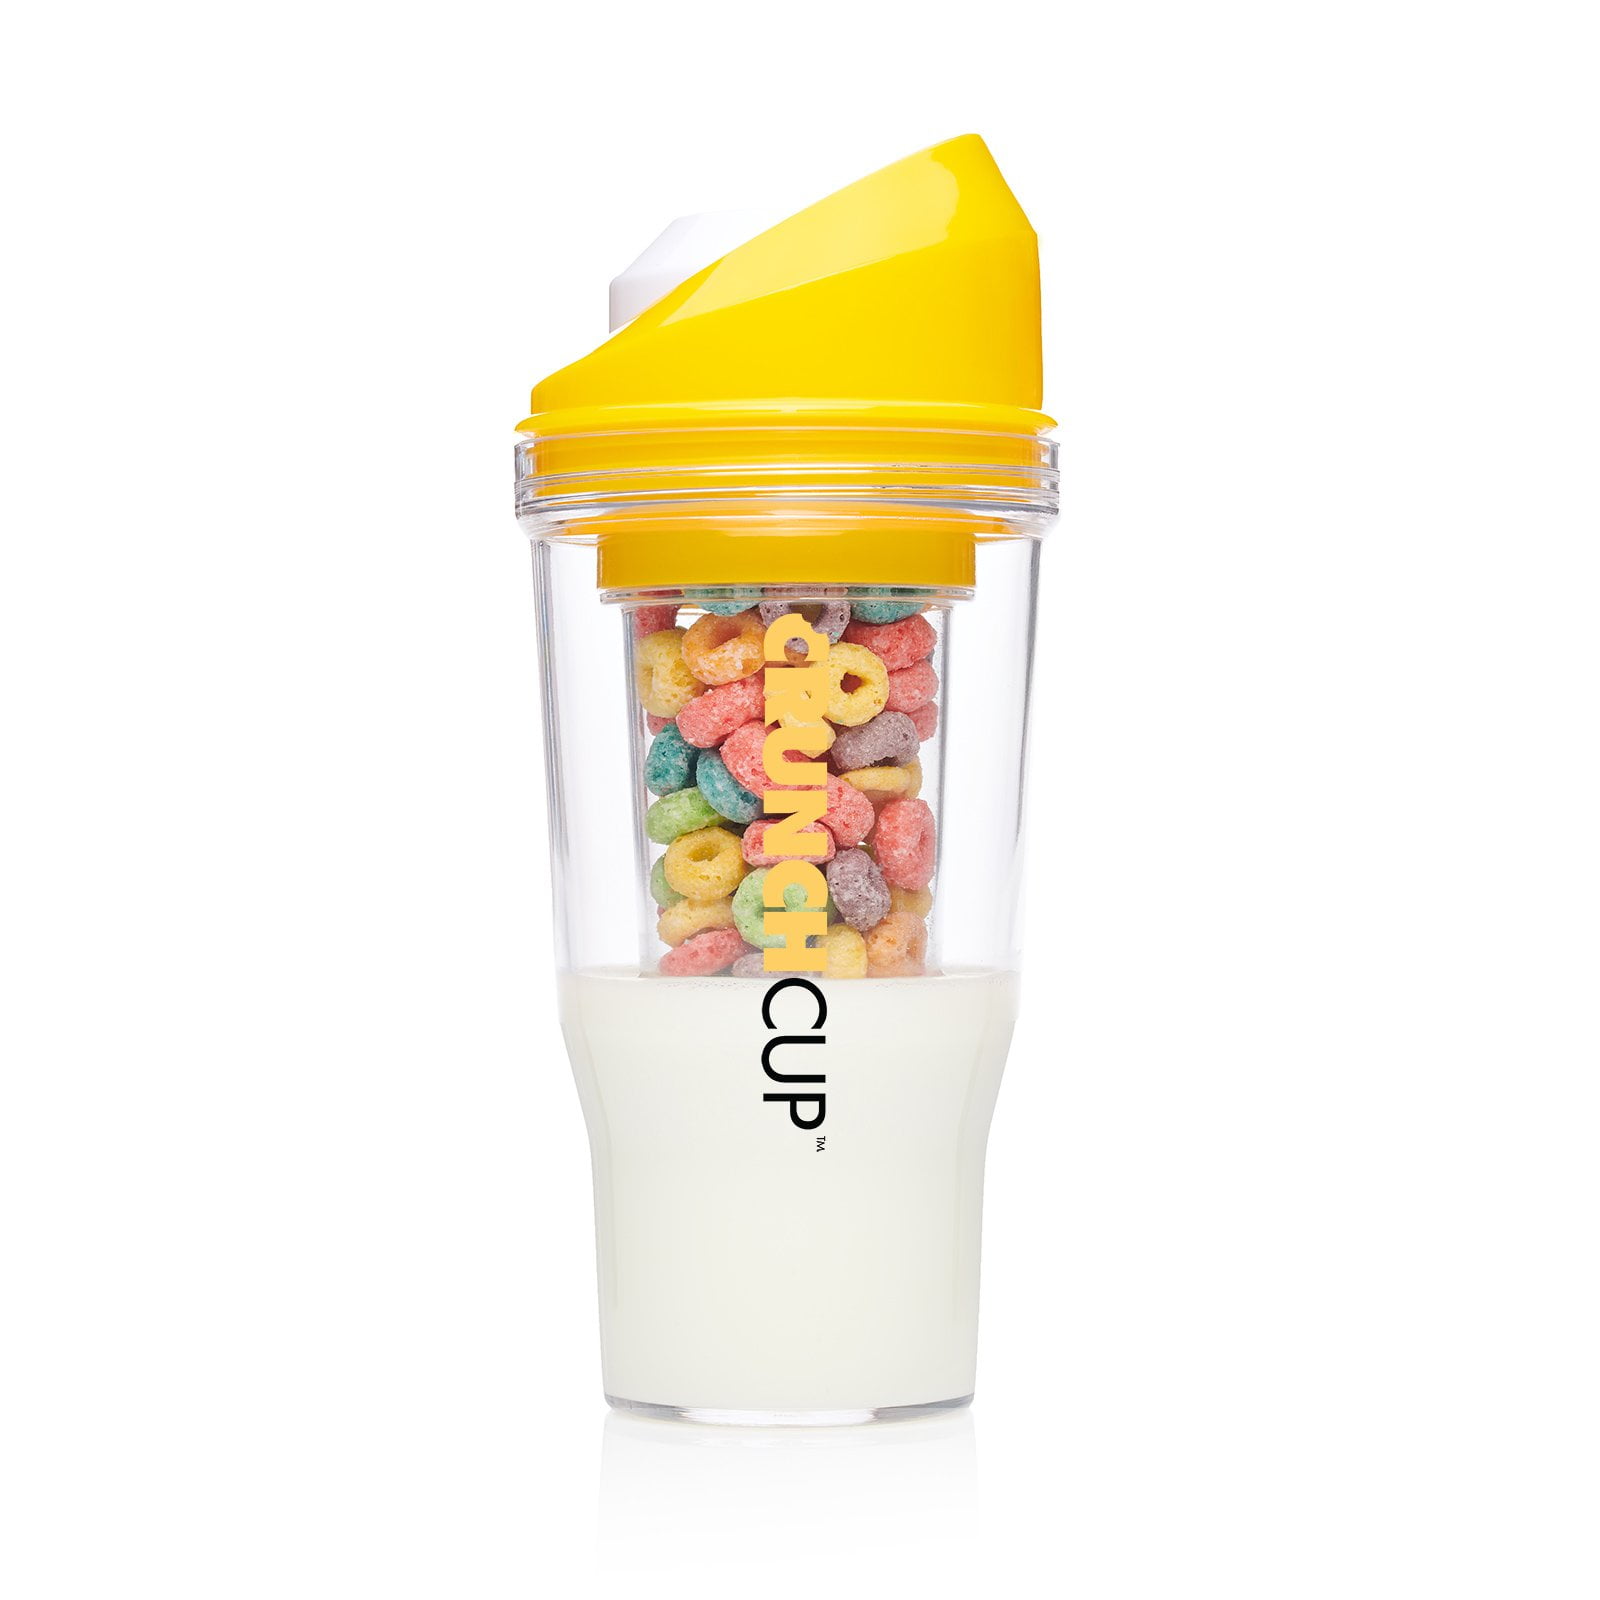 Cereal On The Go Portable Cup Food Bottle Milk Bottle Lunch Box Gel Food Storage 